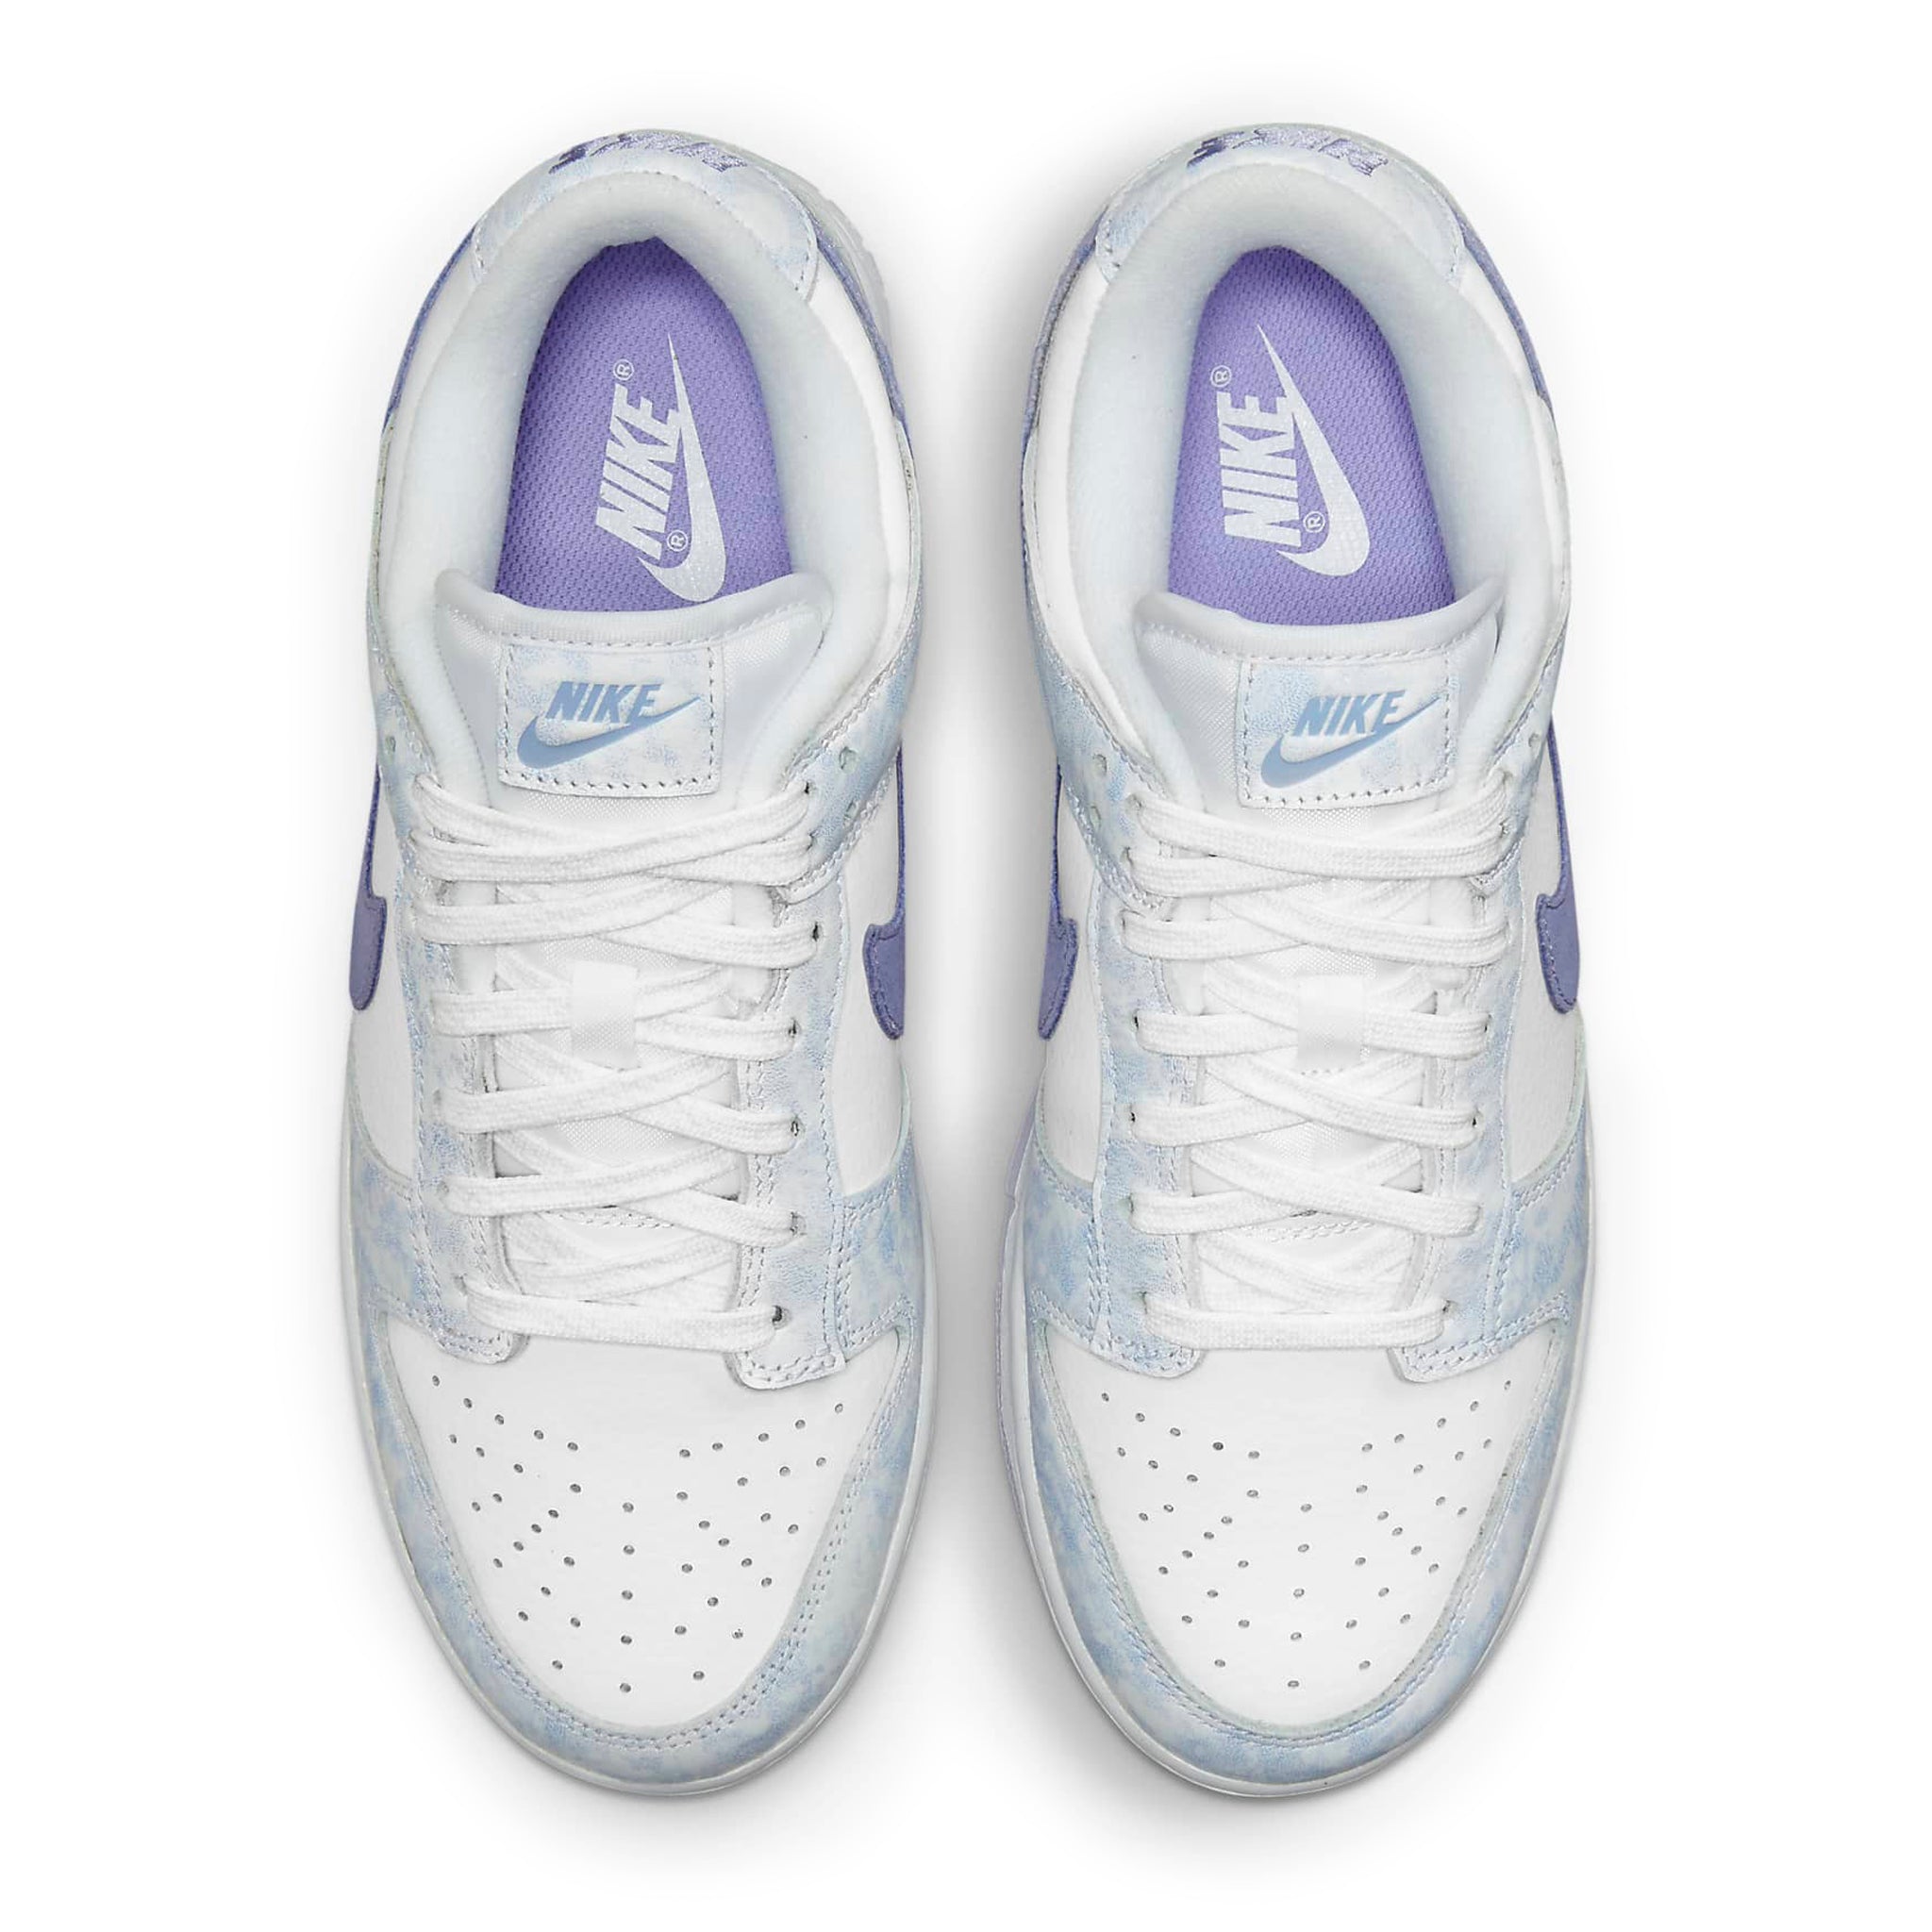 Top down view of Nike Dunk Low Purple Pulse DM9467-500